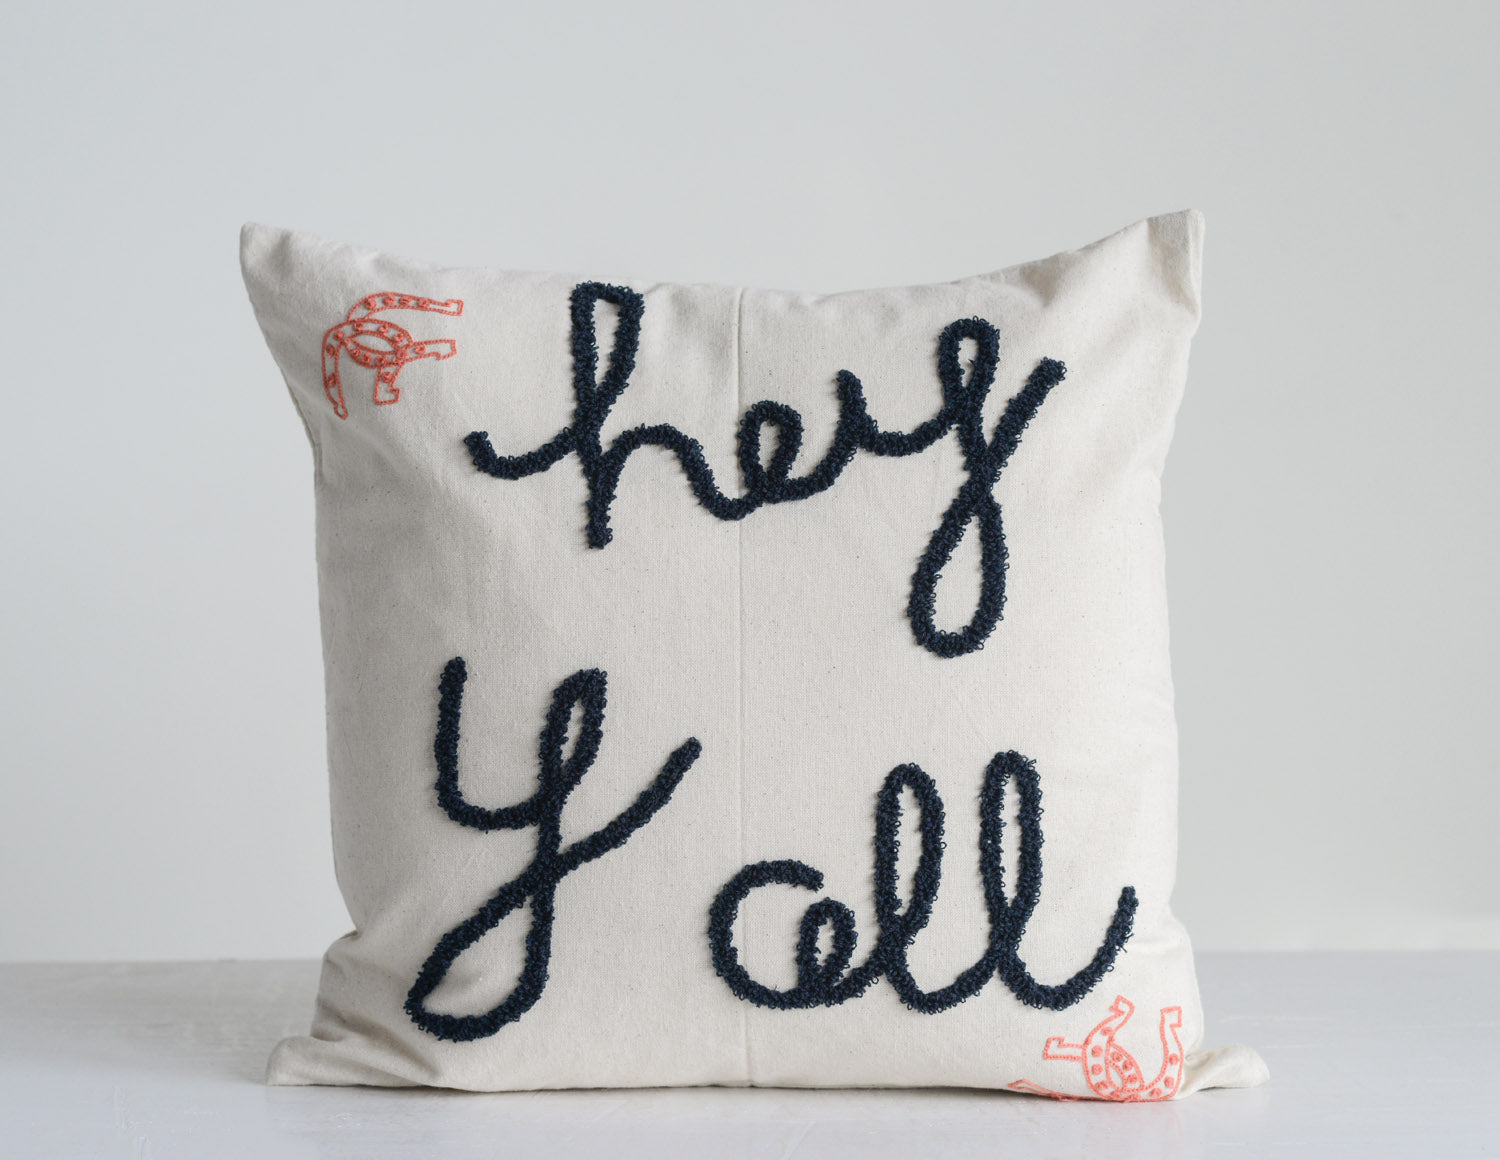 18" Square Cotton Embroidered Pillow "Hey Y'all"